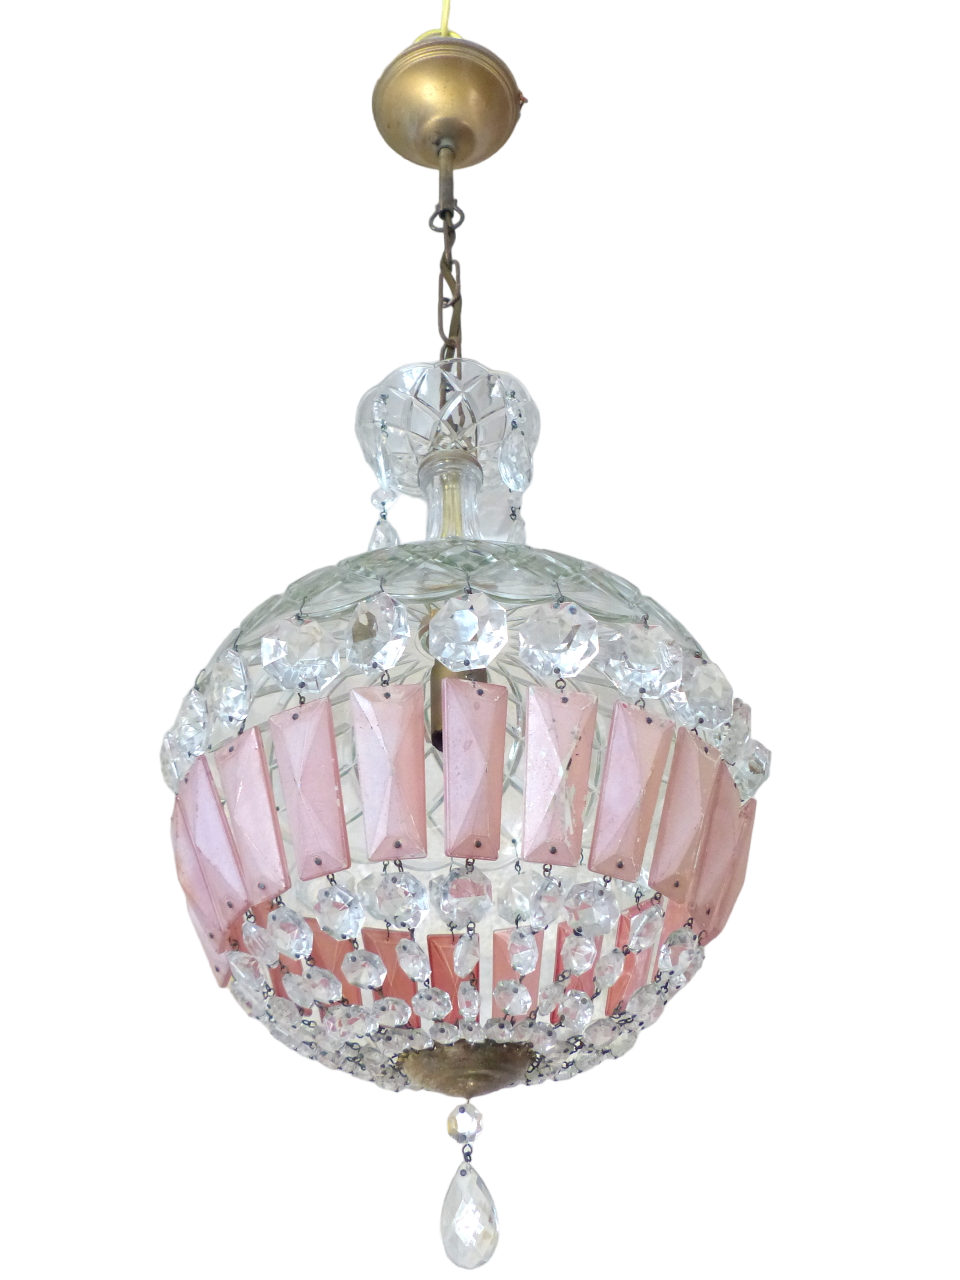 French Vintage Crystal Prisms Pink Plaques Drops Cage Chandelier Ball 1950